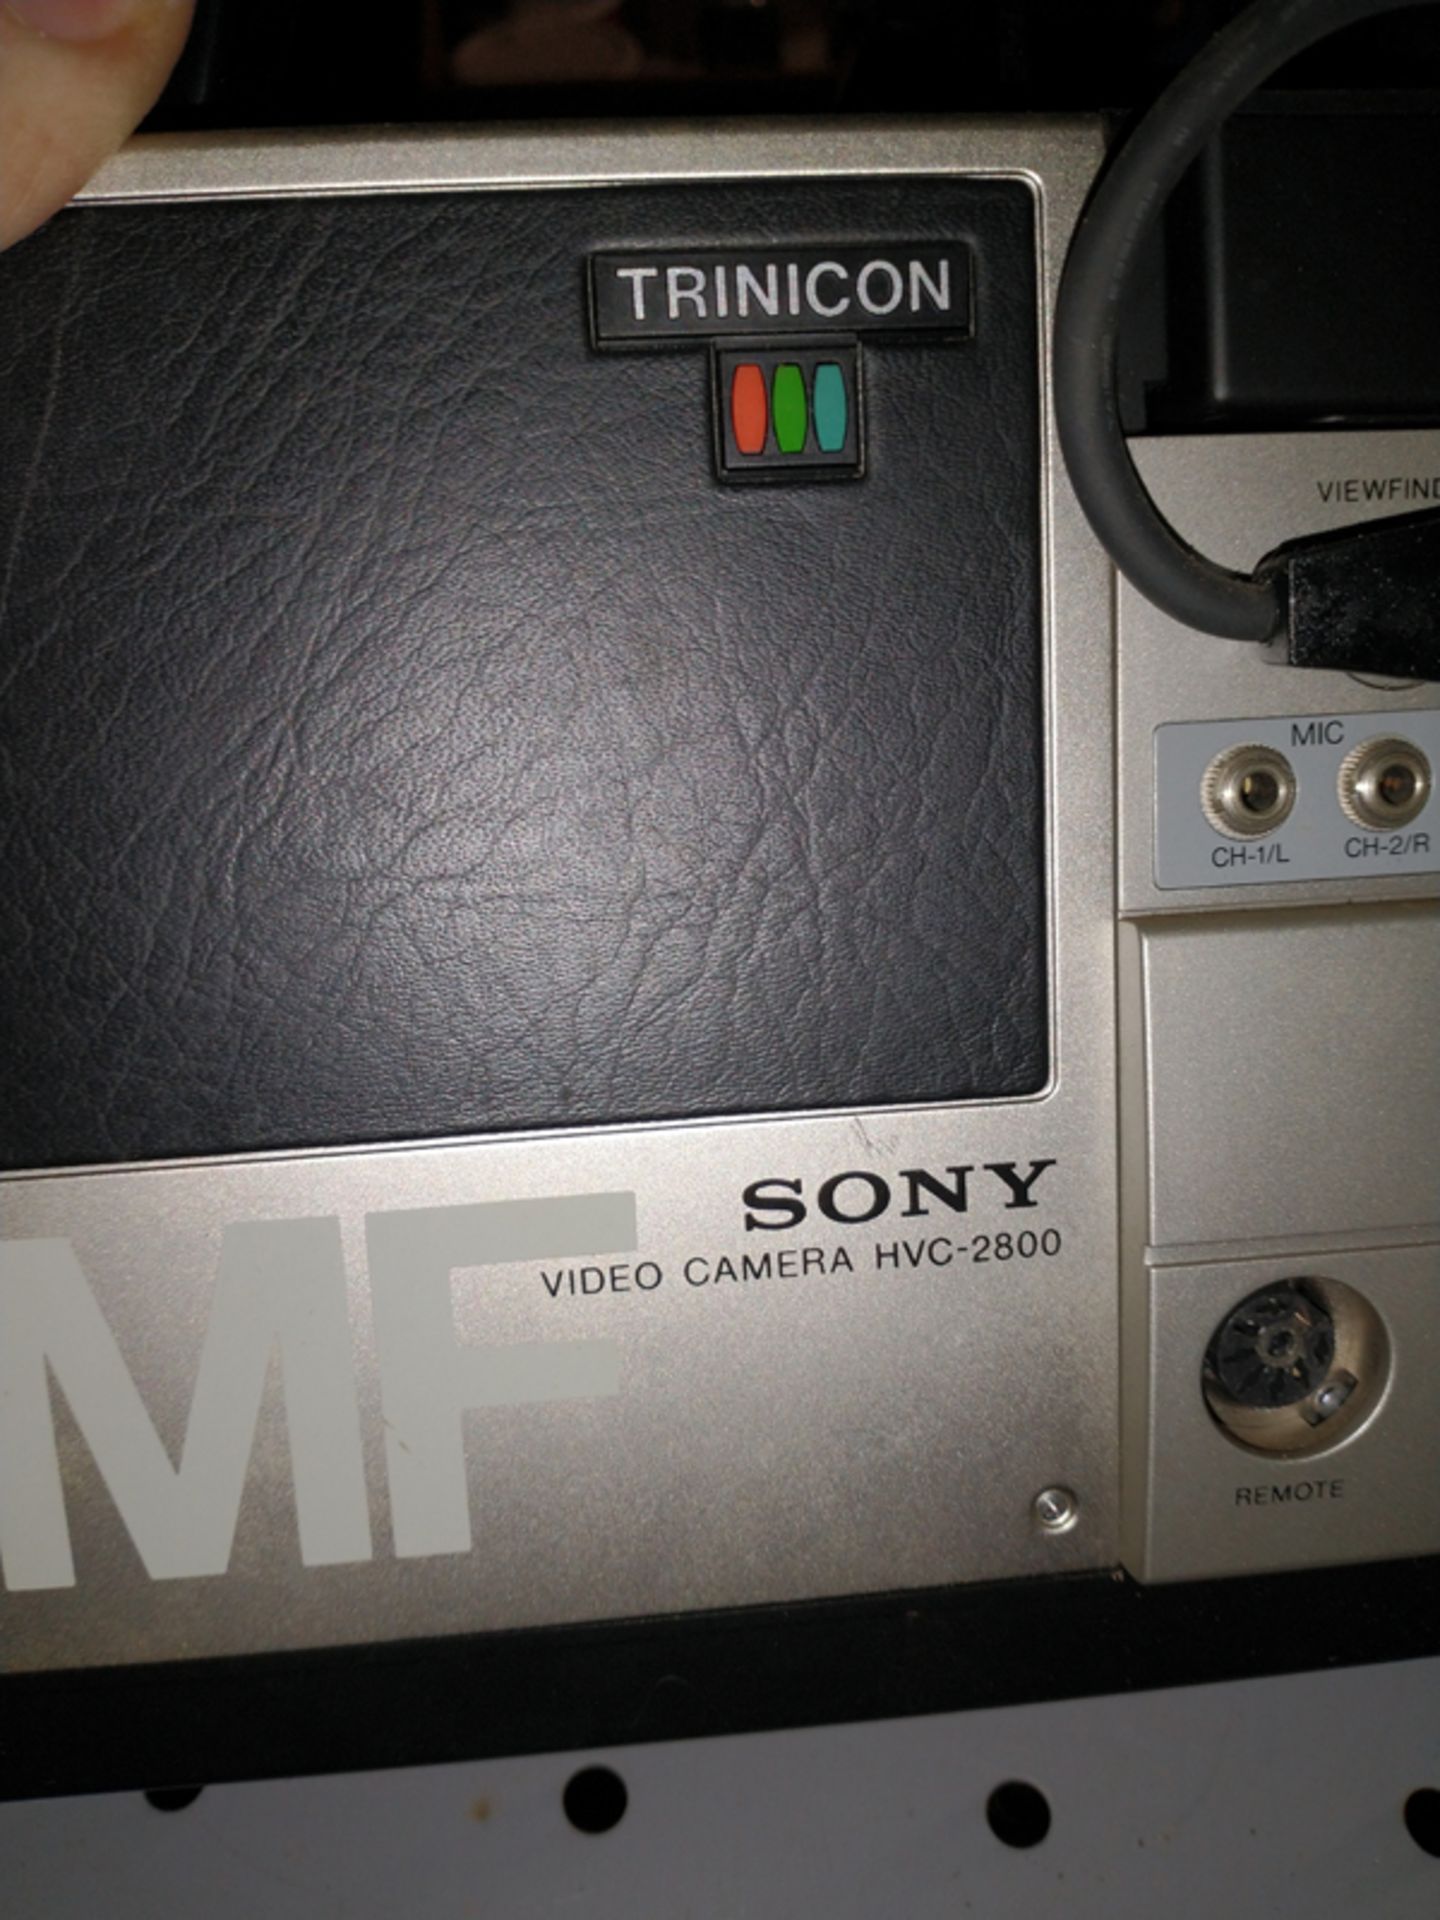 SONY VIDEO CAMERA HVC-2800 - Image 2 of 3